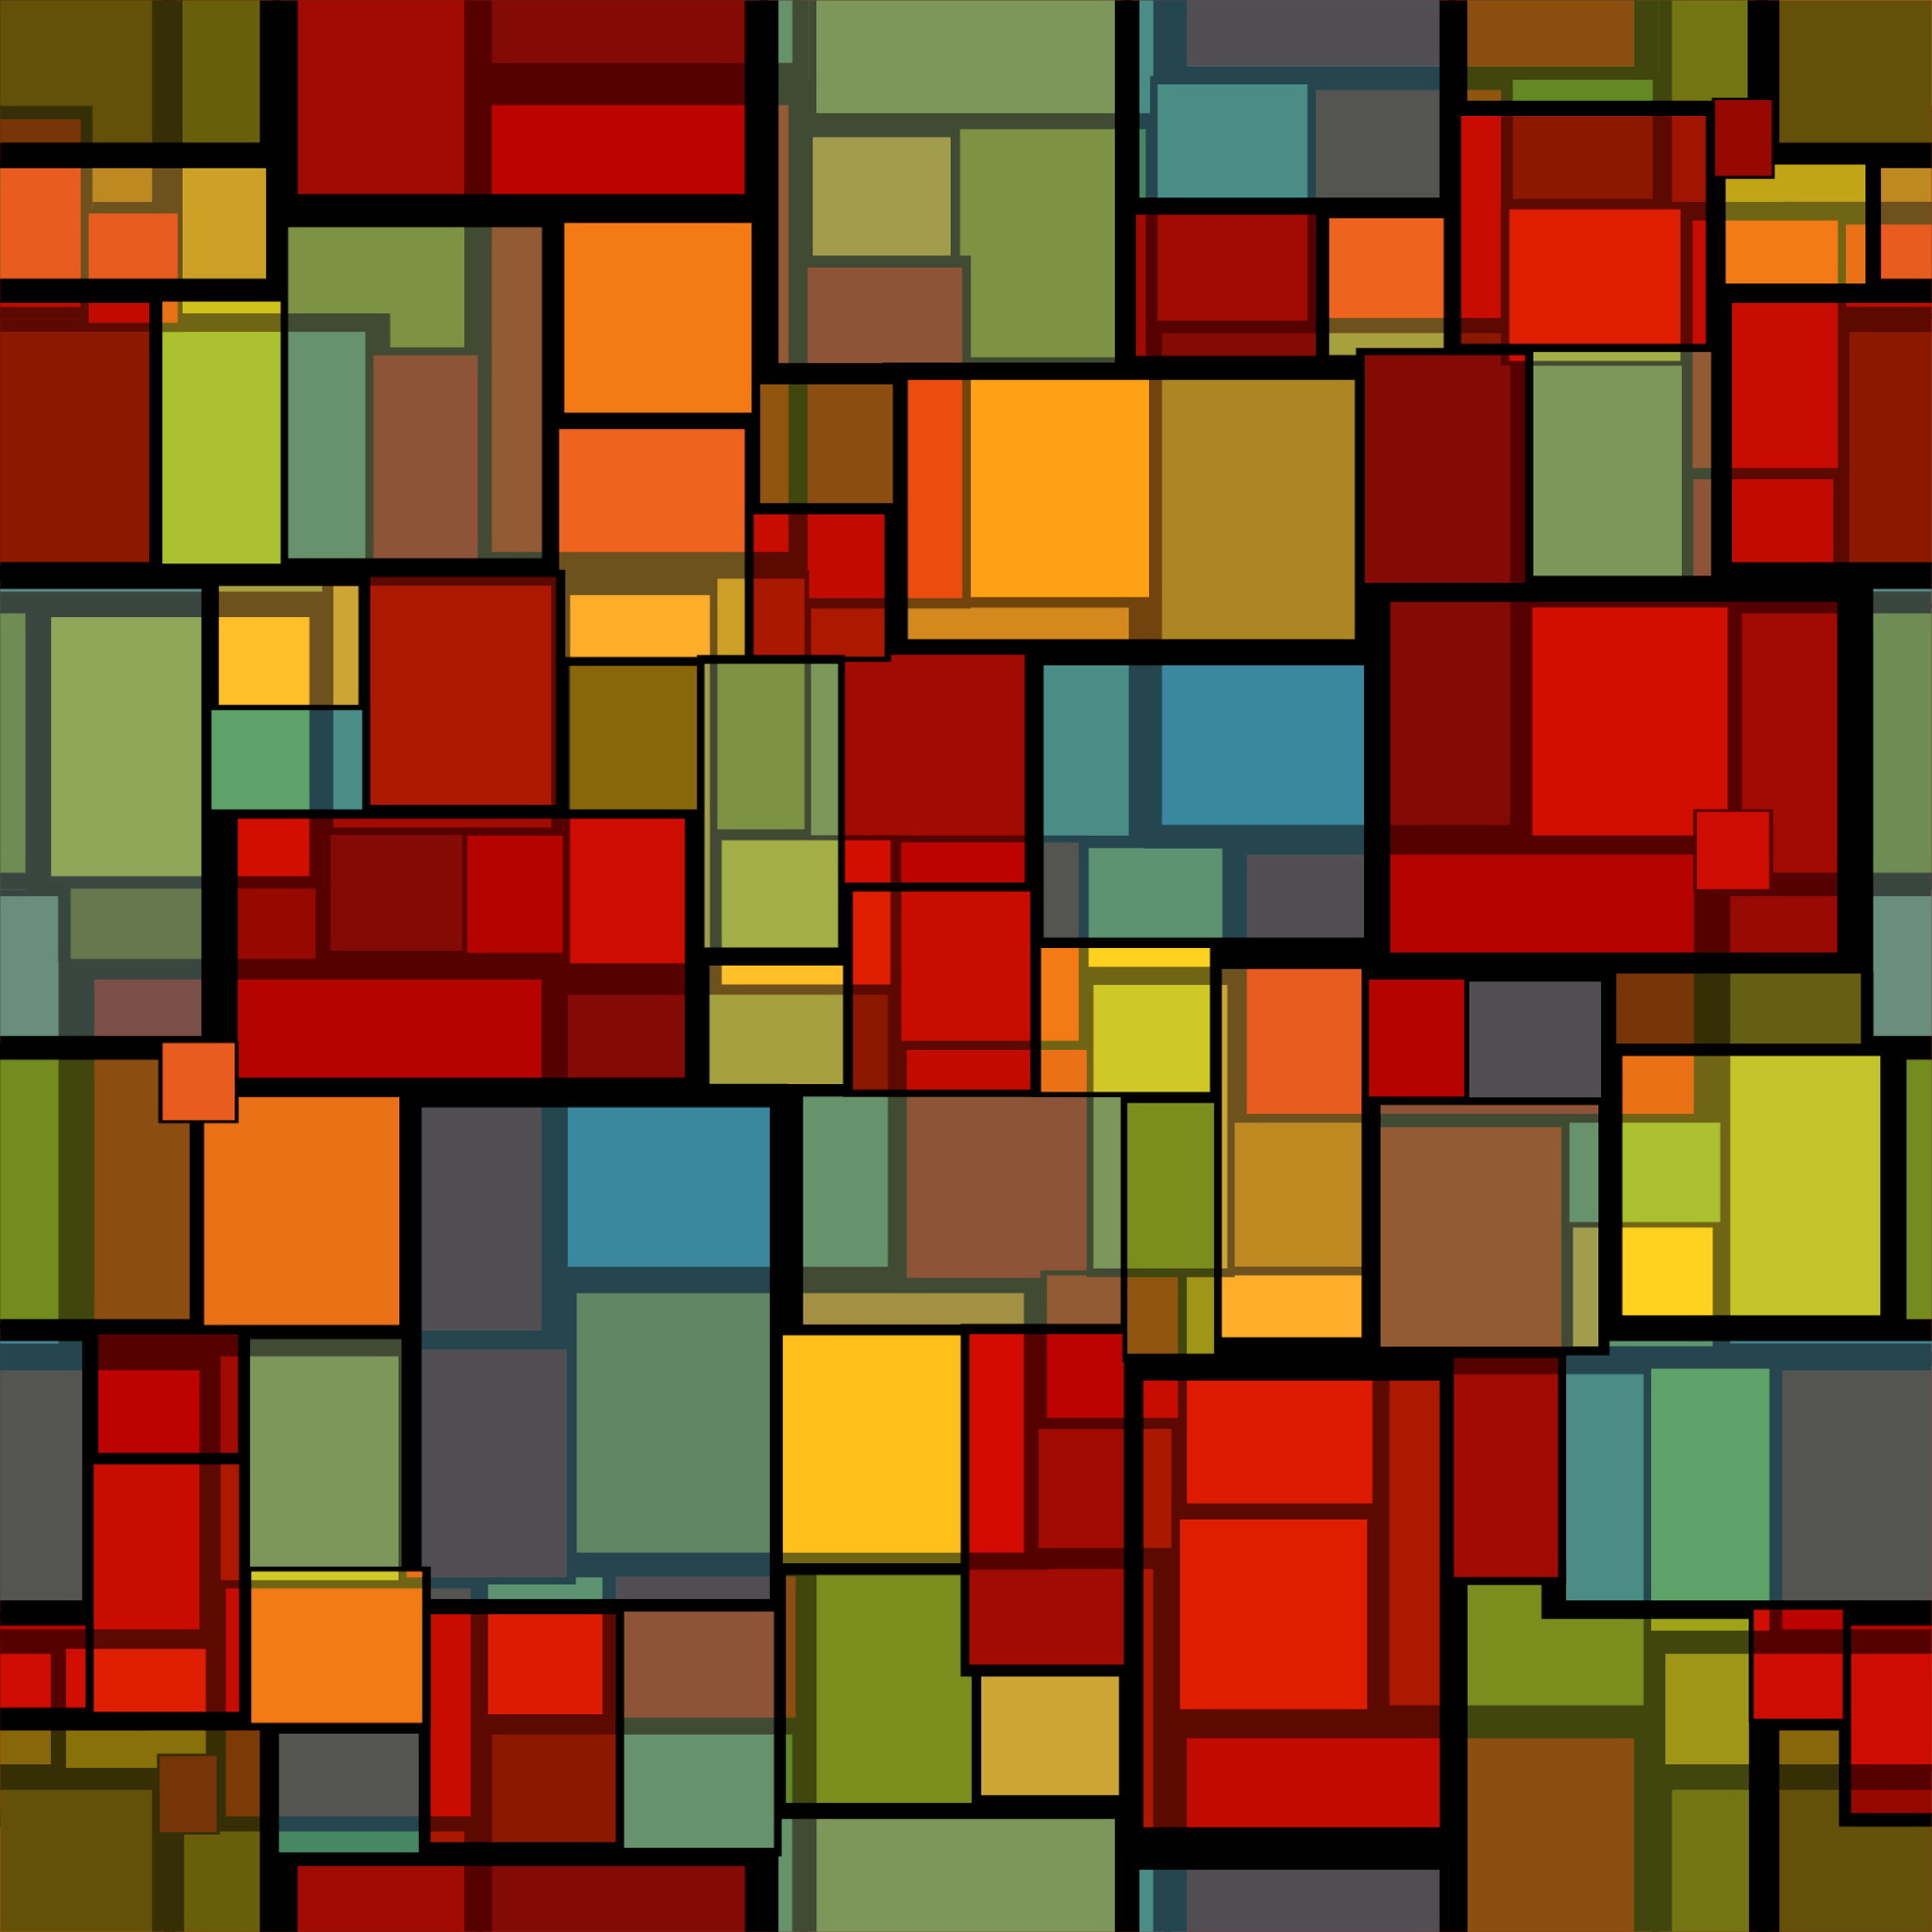 Today’s New Ipad Wallpapers 04/05/2013 » New Ipad Wallpaper - Stained Glass Seamless Patterns , HD Wallpaper & Backgrounds